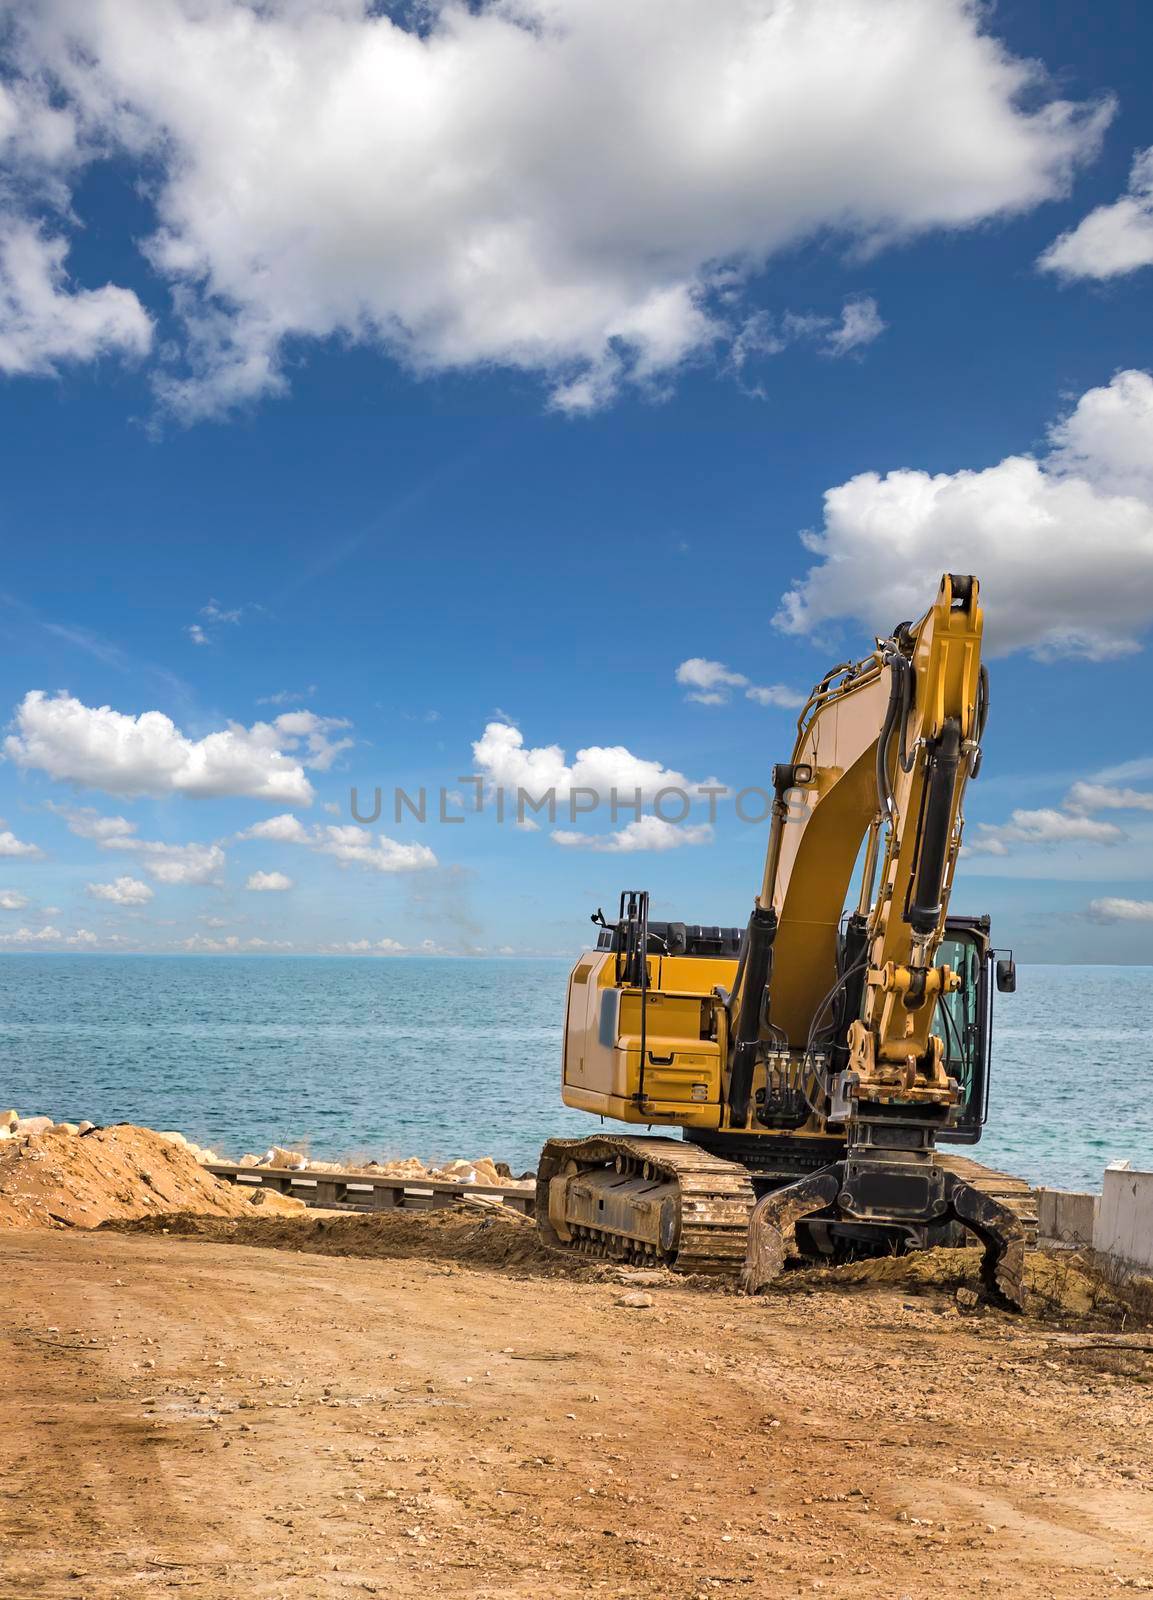 Crawler excavator after works at the construction site at sea beach